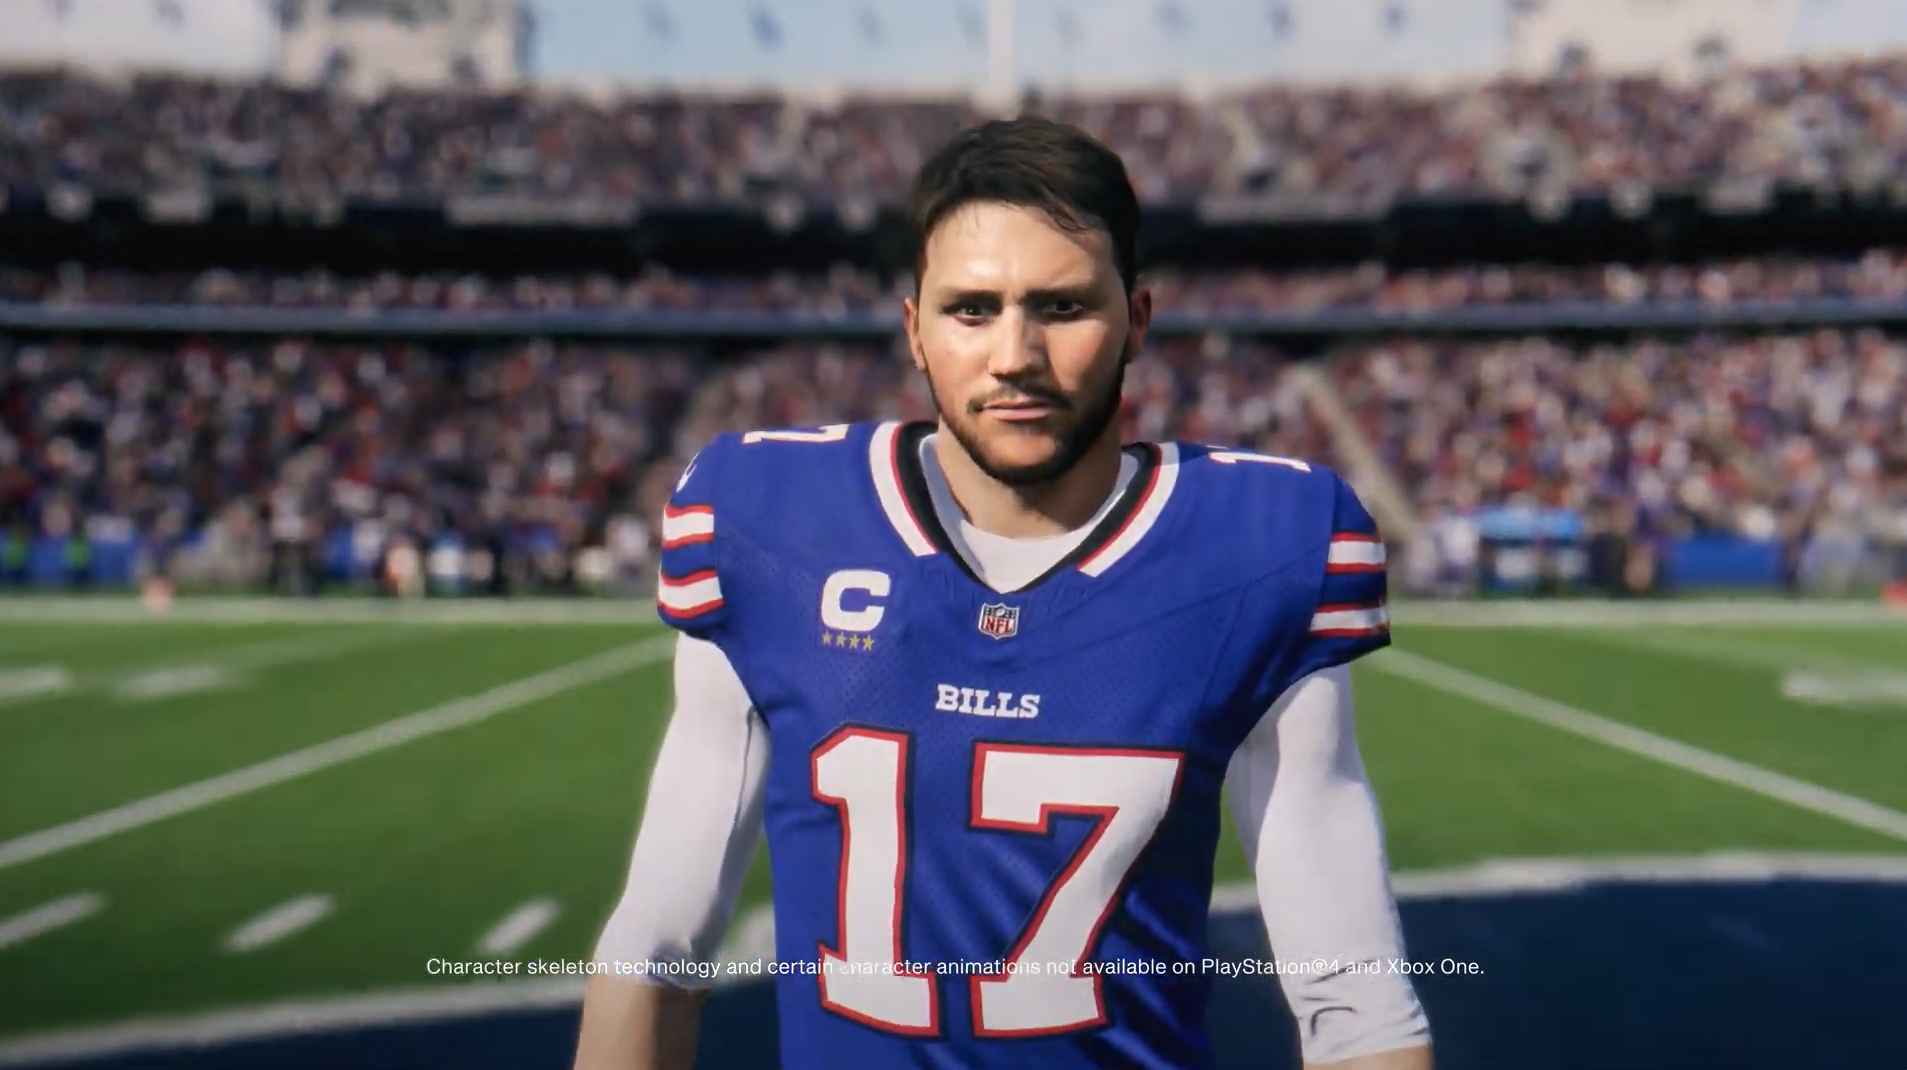 Madden NFL 24 Trailer, Cover Athlete, Release Date, Screenshots & More